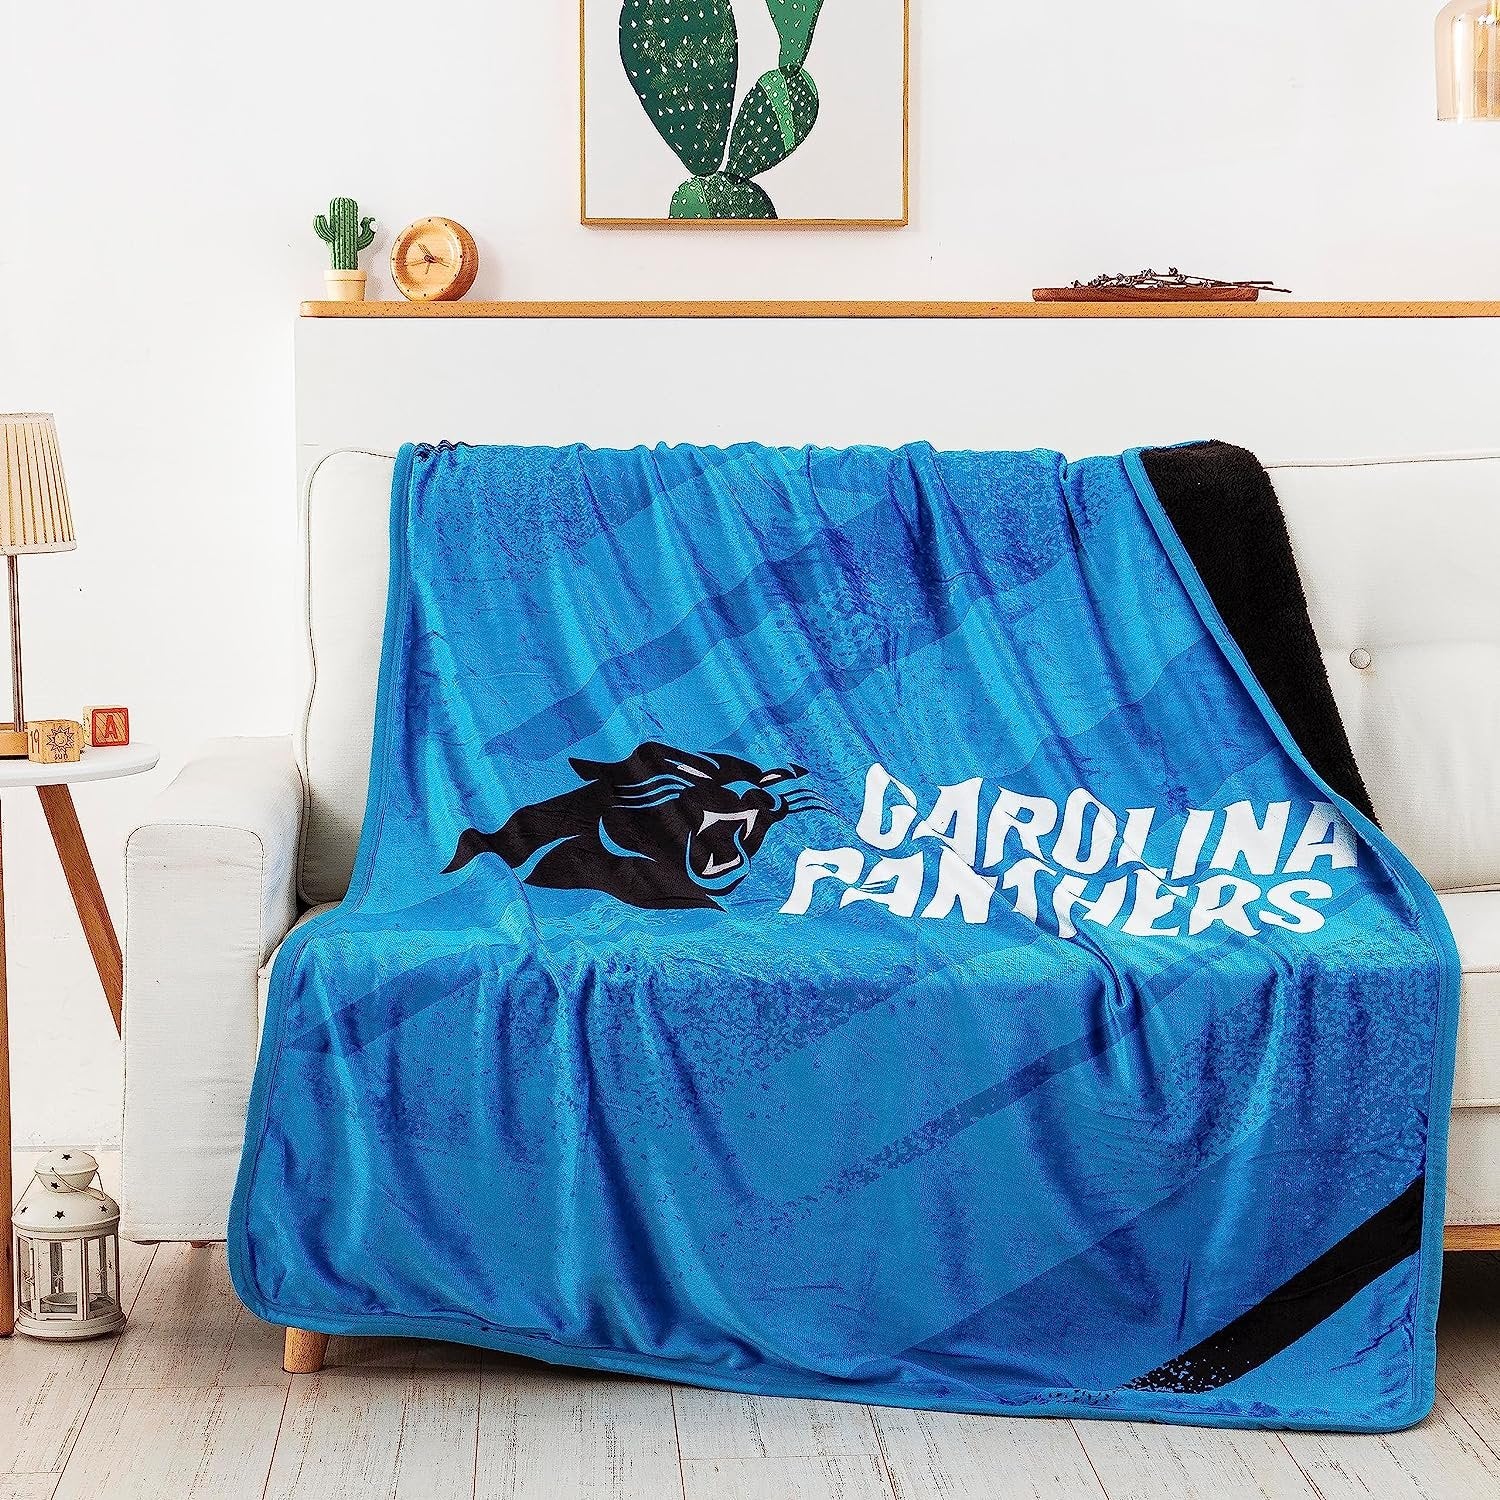 Carolina Panthers Throw Blanket, Sherpa Raschel Polyester, Silk Touch Style, Velocity Design, 50x60 Inch